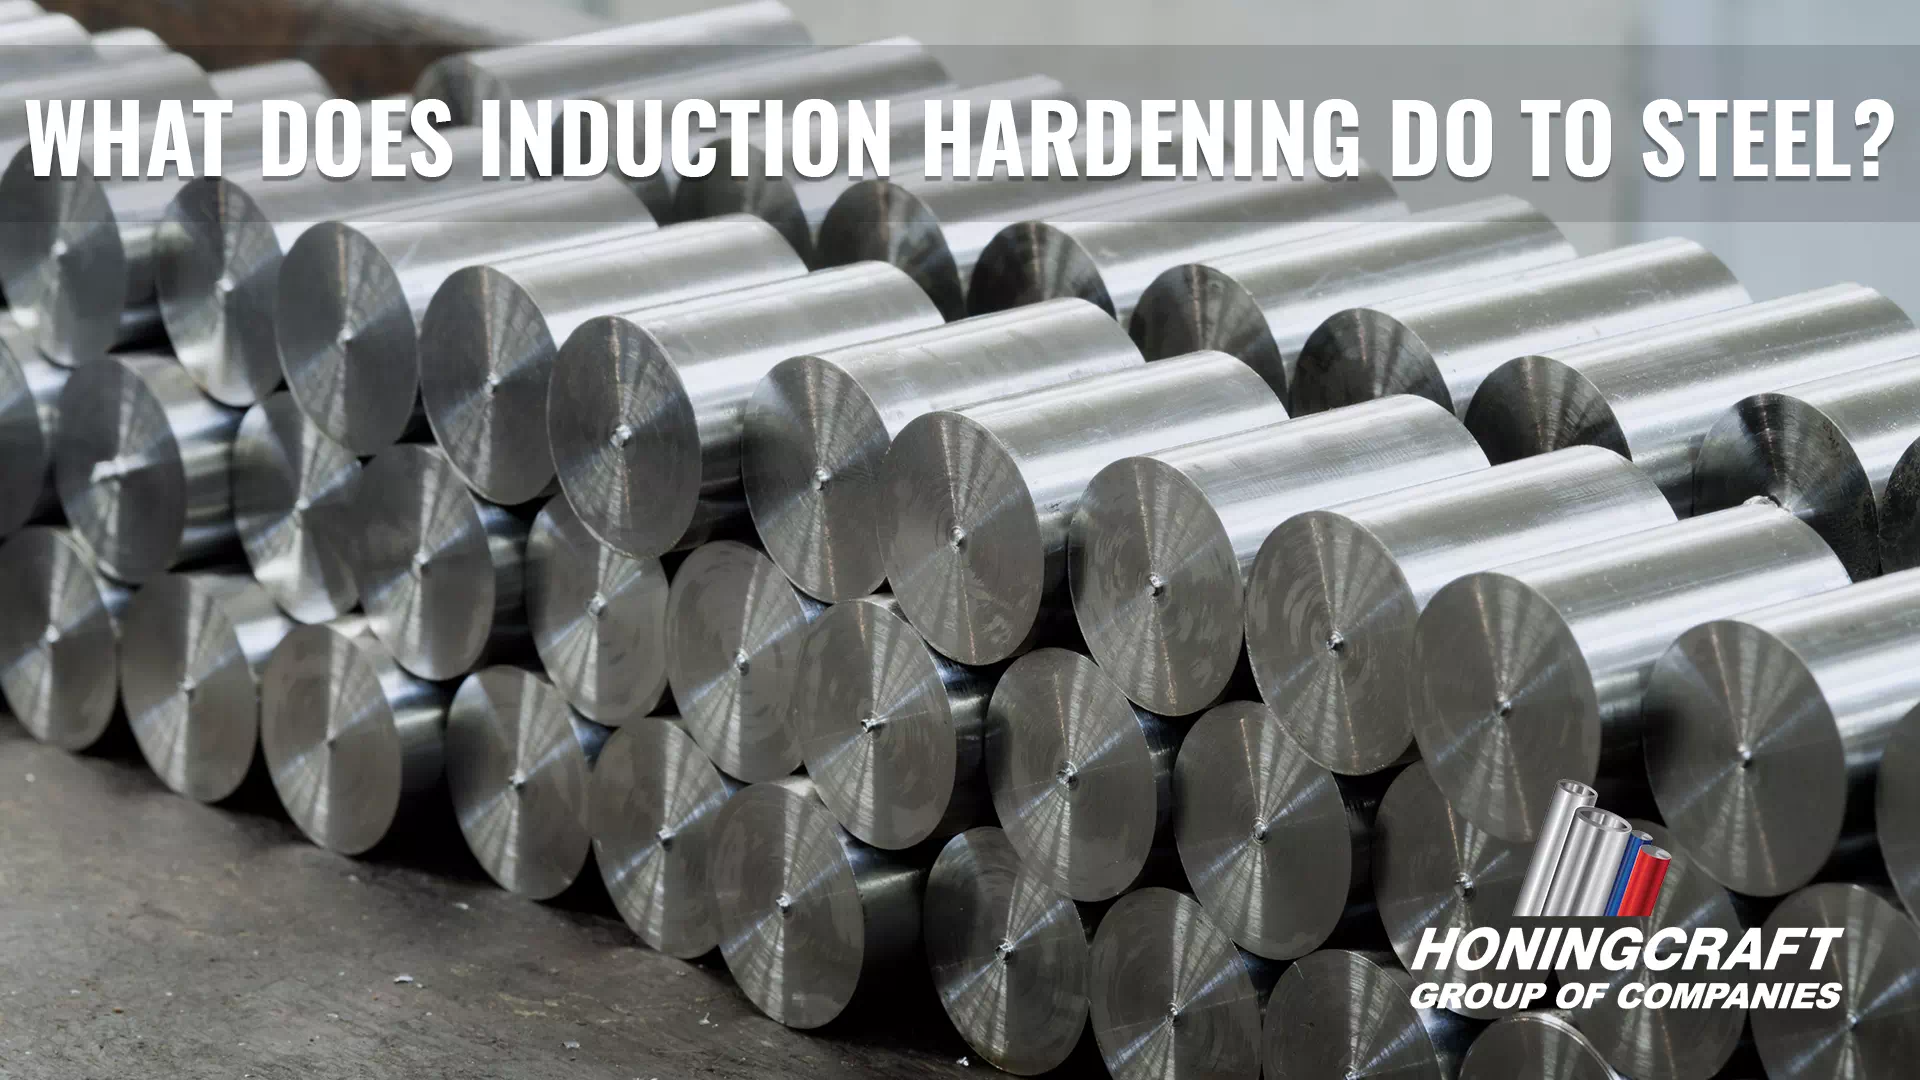 What Does Induction Hardening Do to Steel?